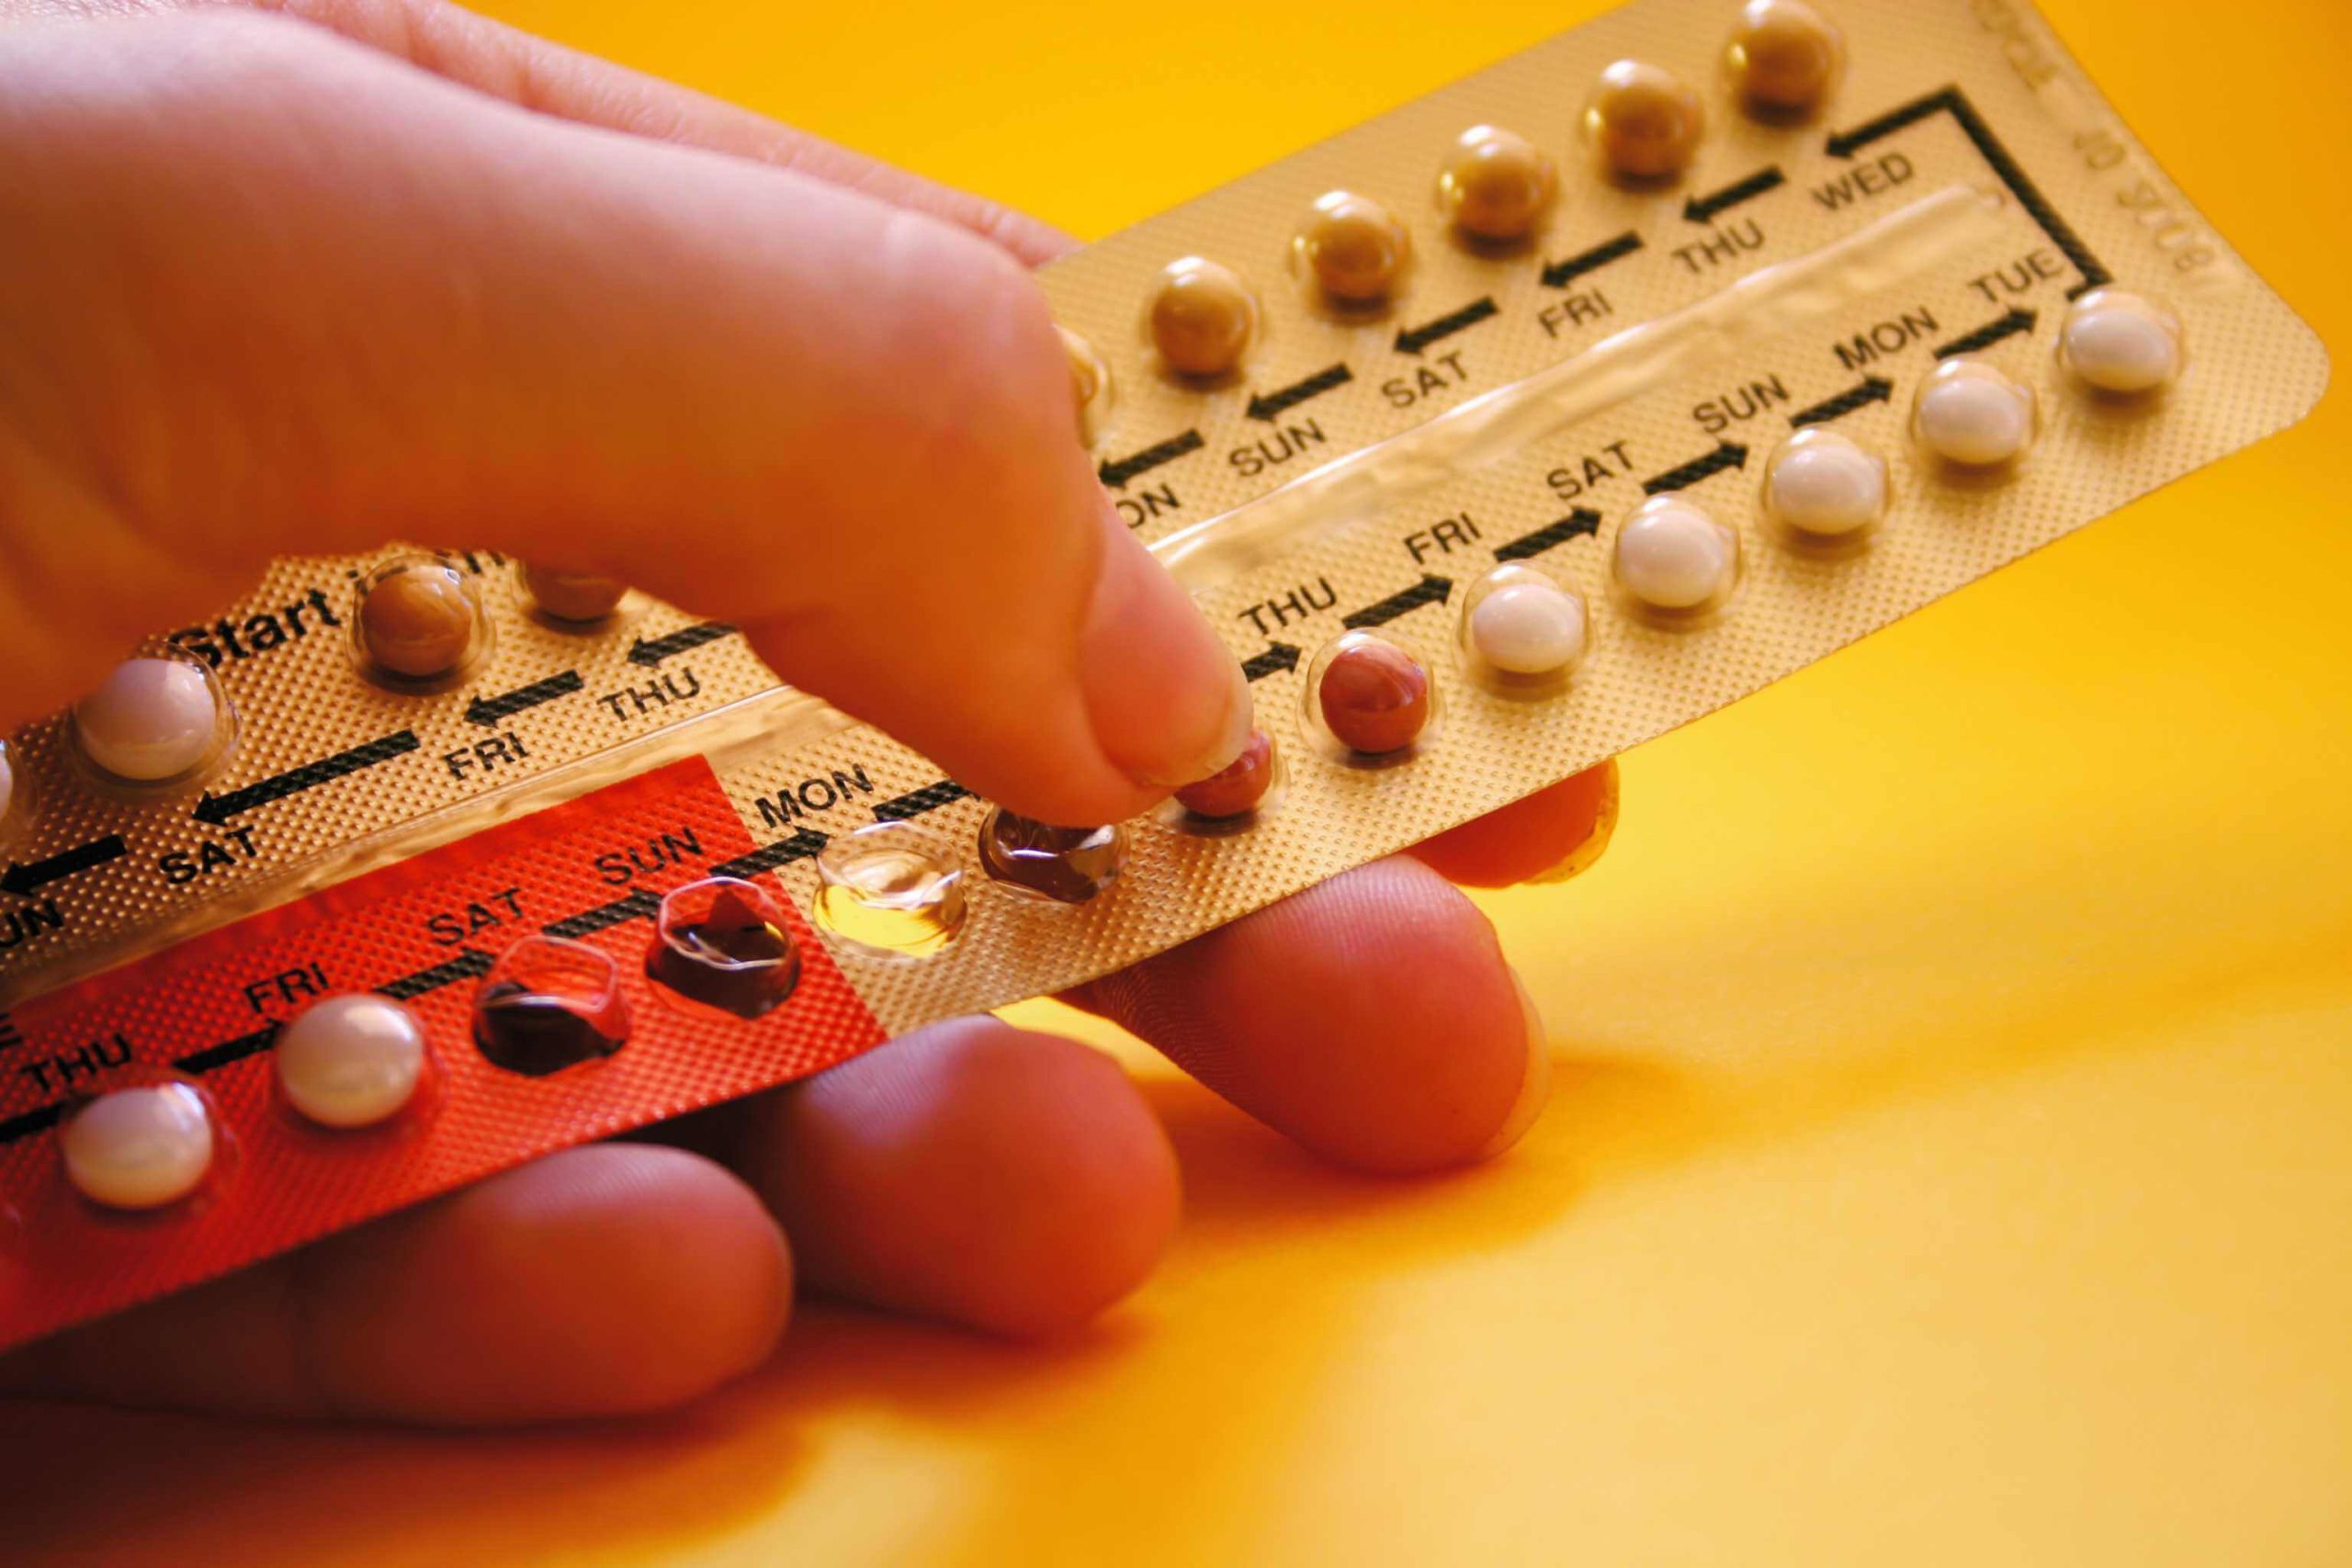 The pill for controlling one’s period?